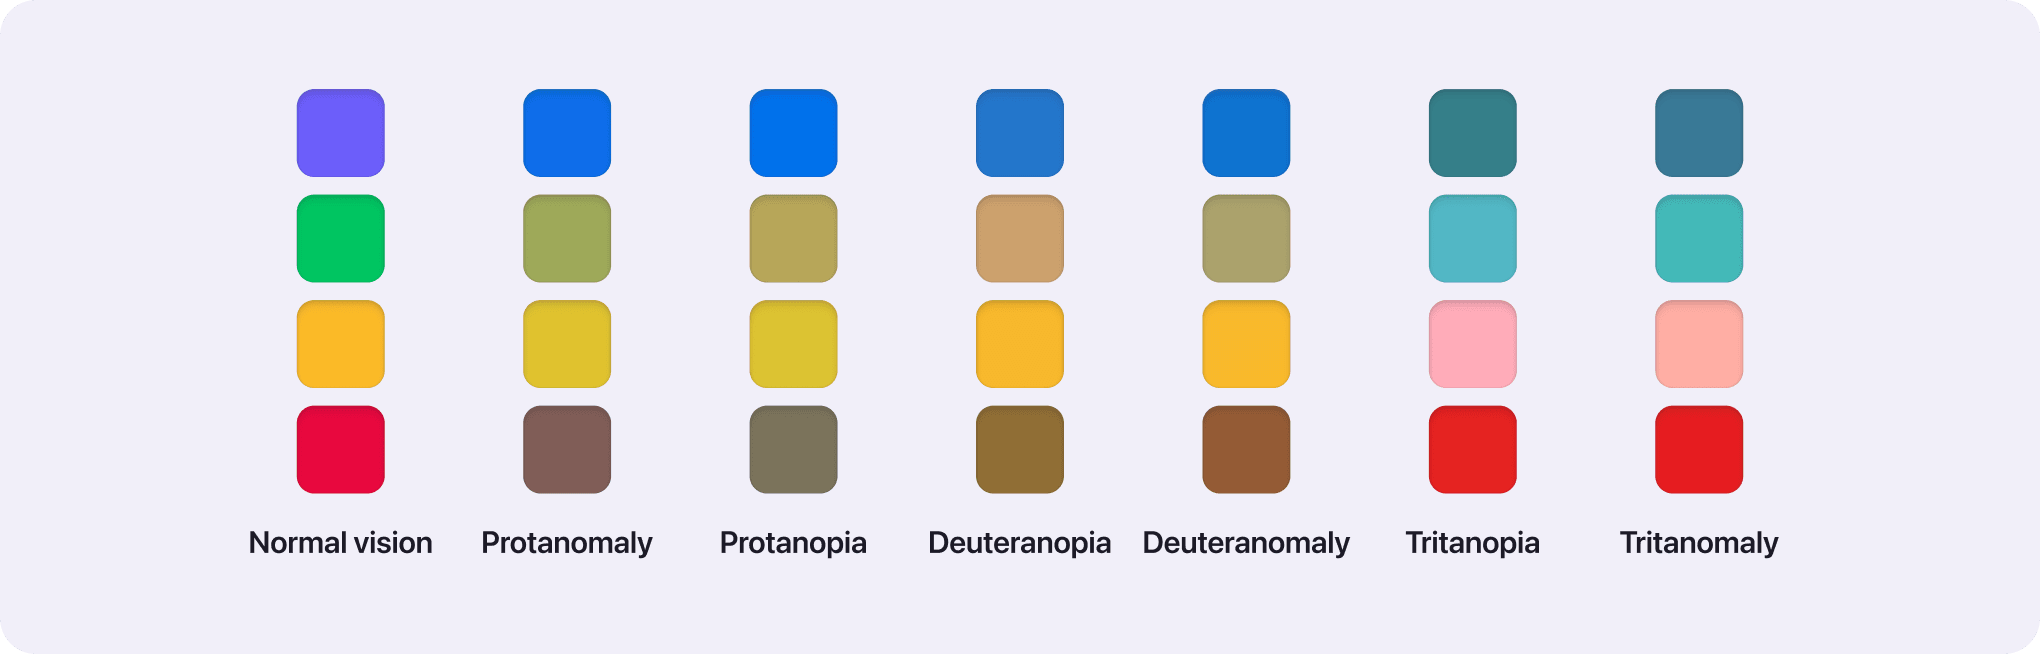 Different kinds of color blindness visualized